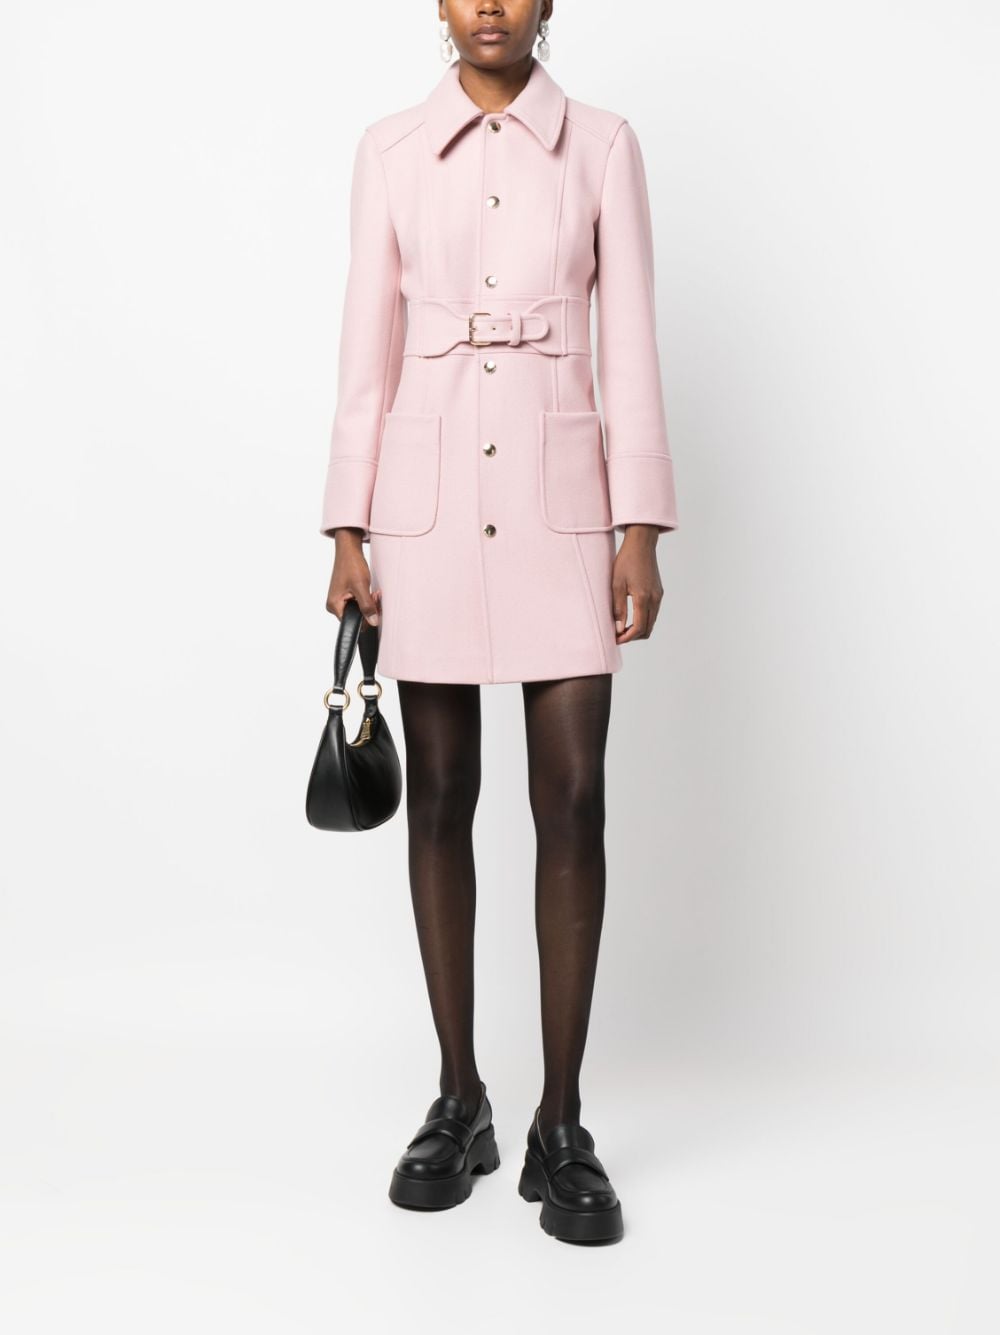 Louis Vuitton Belted Pink Angora Single-Breasted Coat